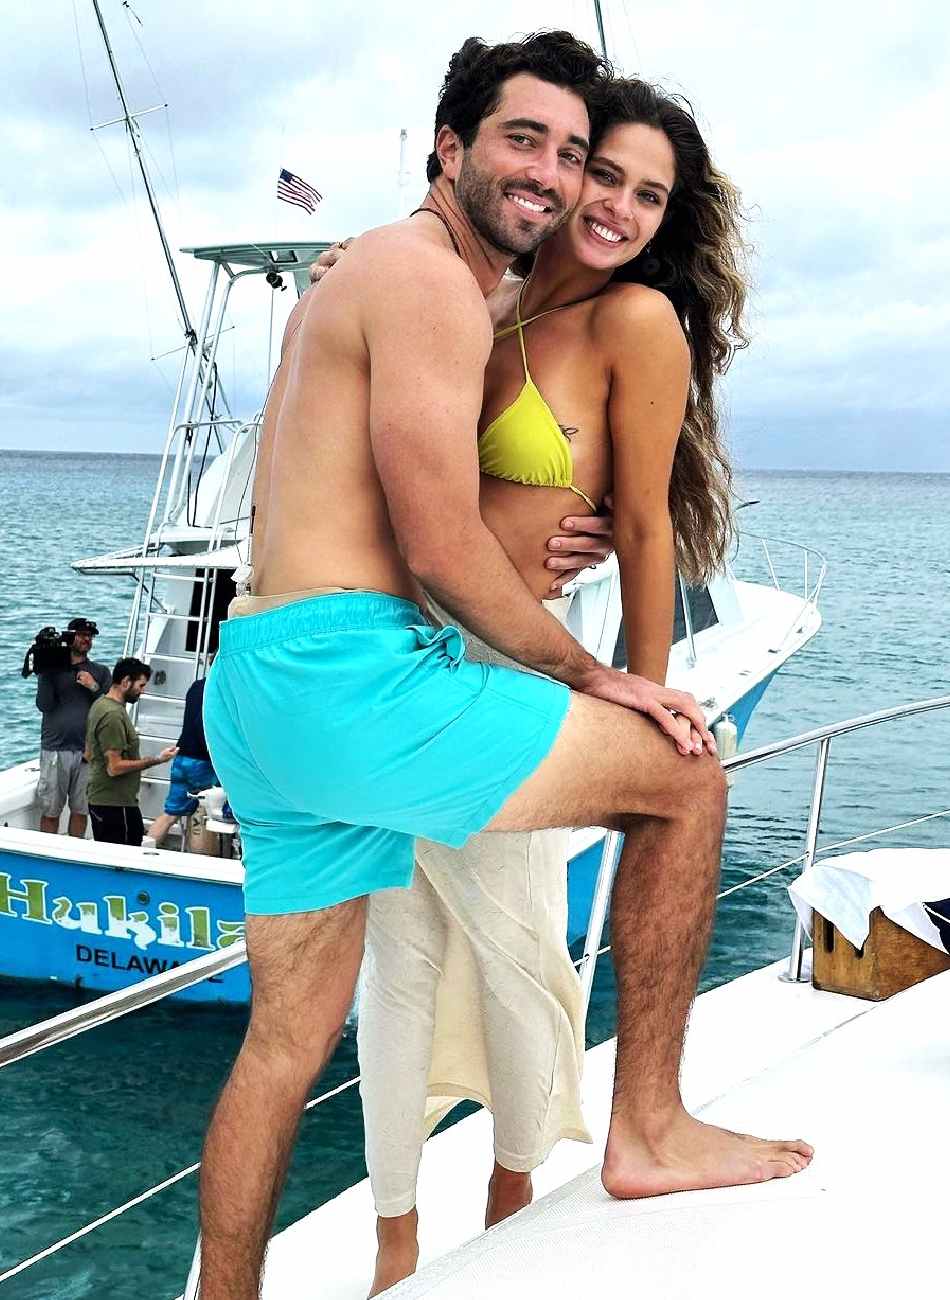 Bachelor Falling in Love Fully with Kelsey Tops Emotional Tulum Episode